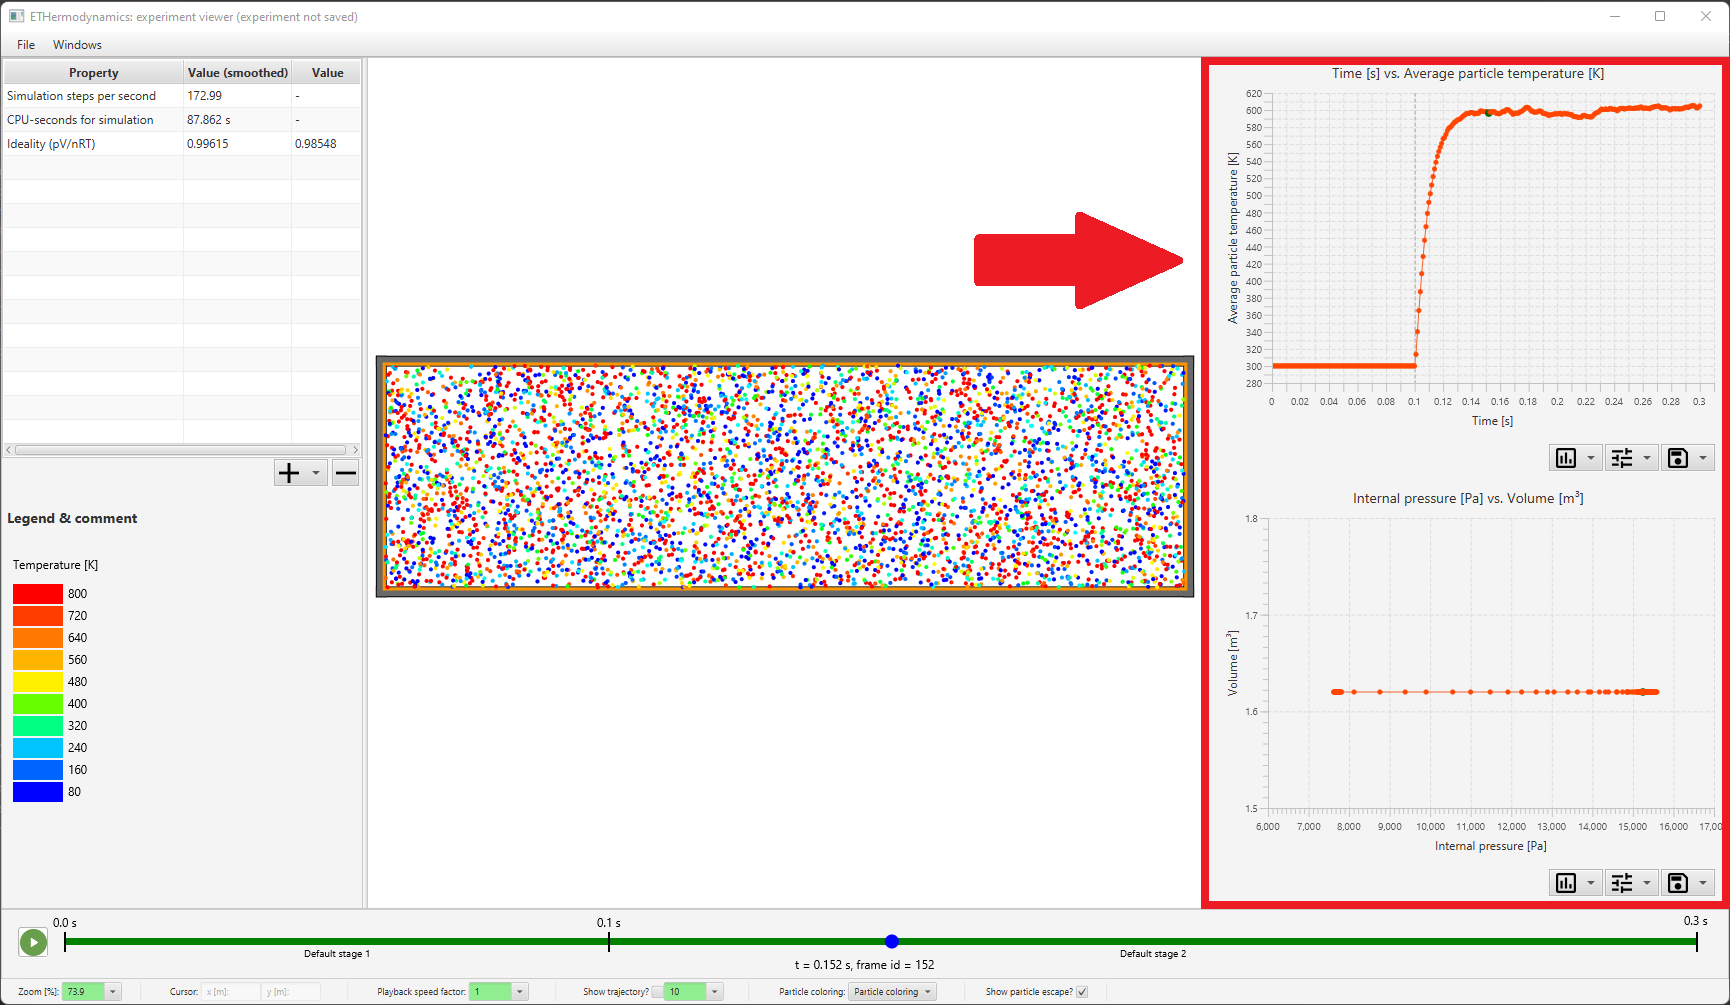 On the right you can see two graphs displayed. They update automatically as more data is collected during simulation.